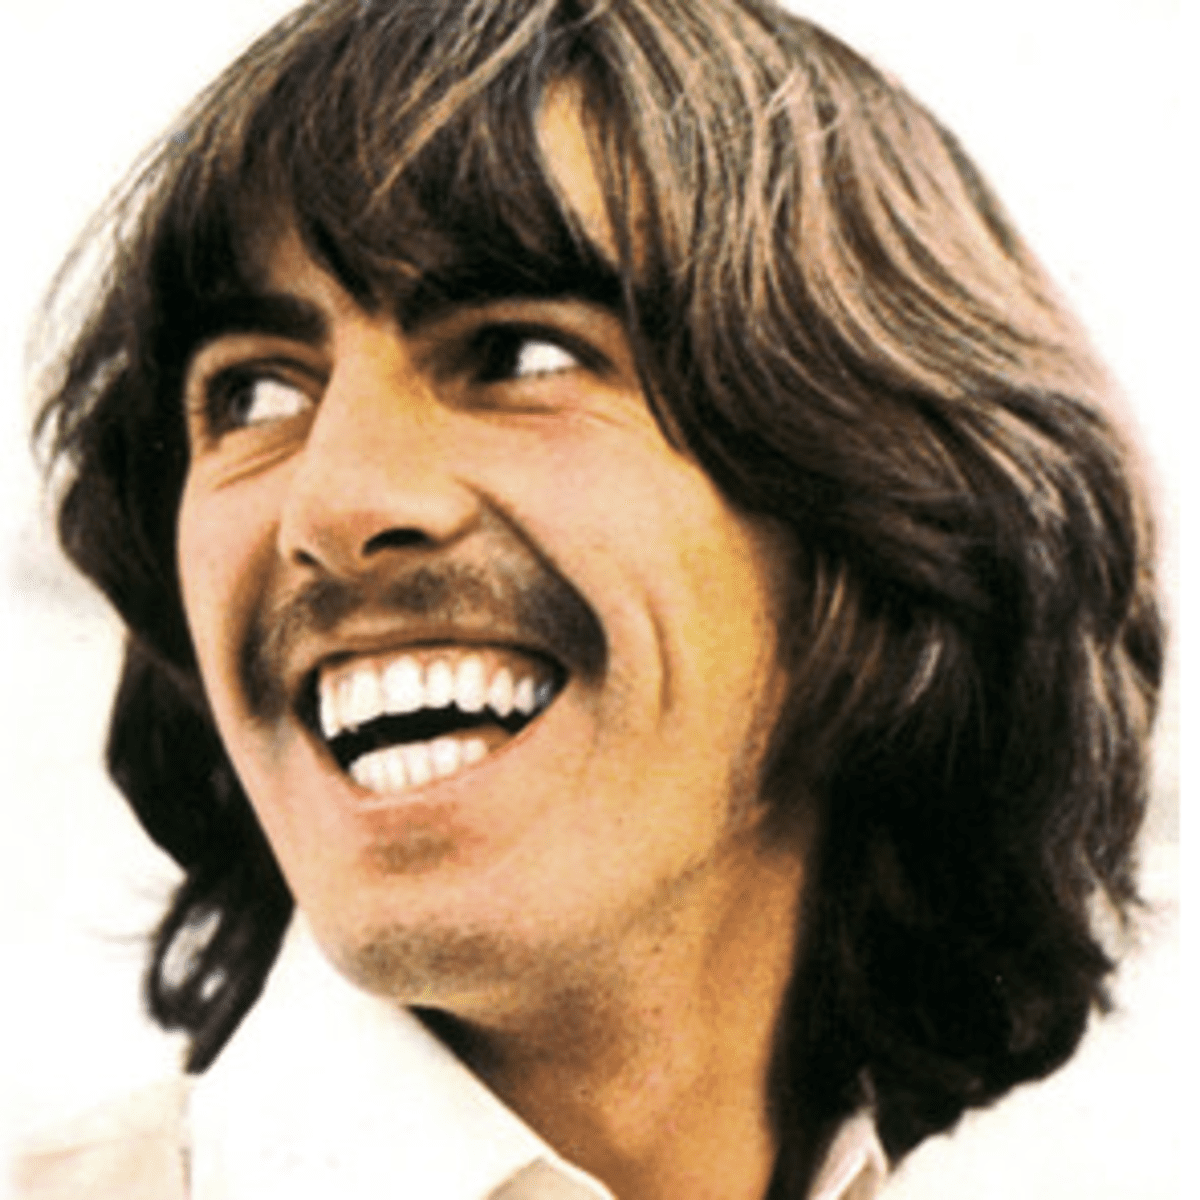 George Harrison: The Most Spiritual Beatle - Spinditty